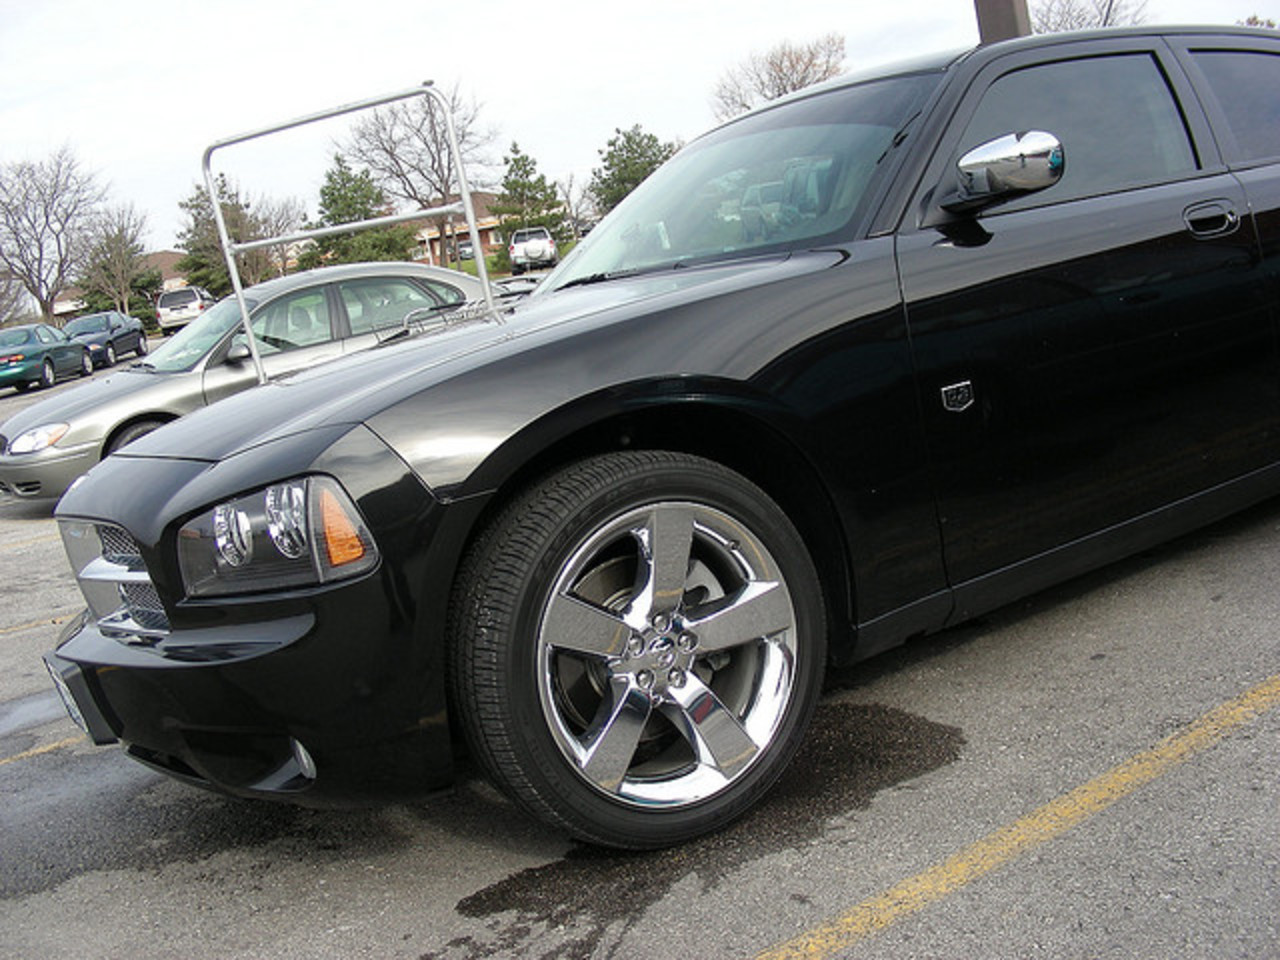 Dodge Charger SXT "DUB Edition" | Flickr - Photo Sharing!